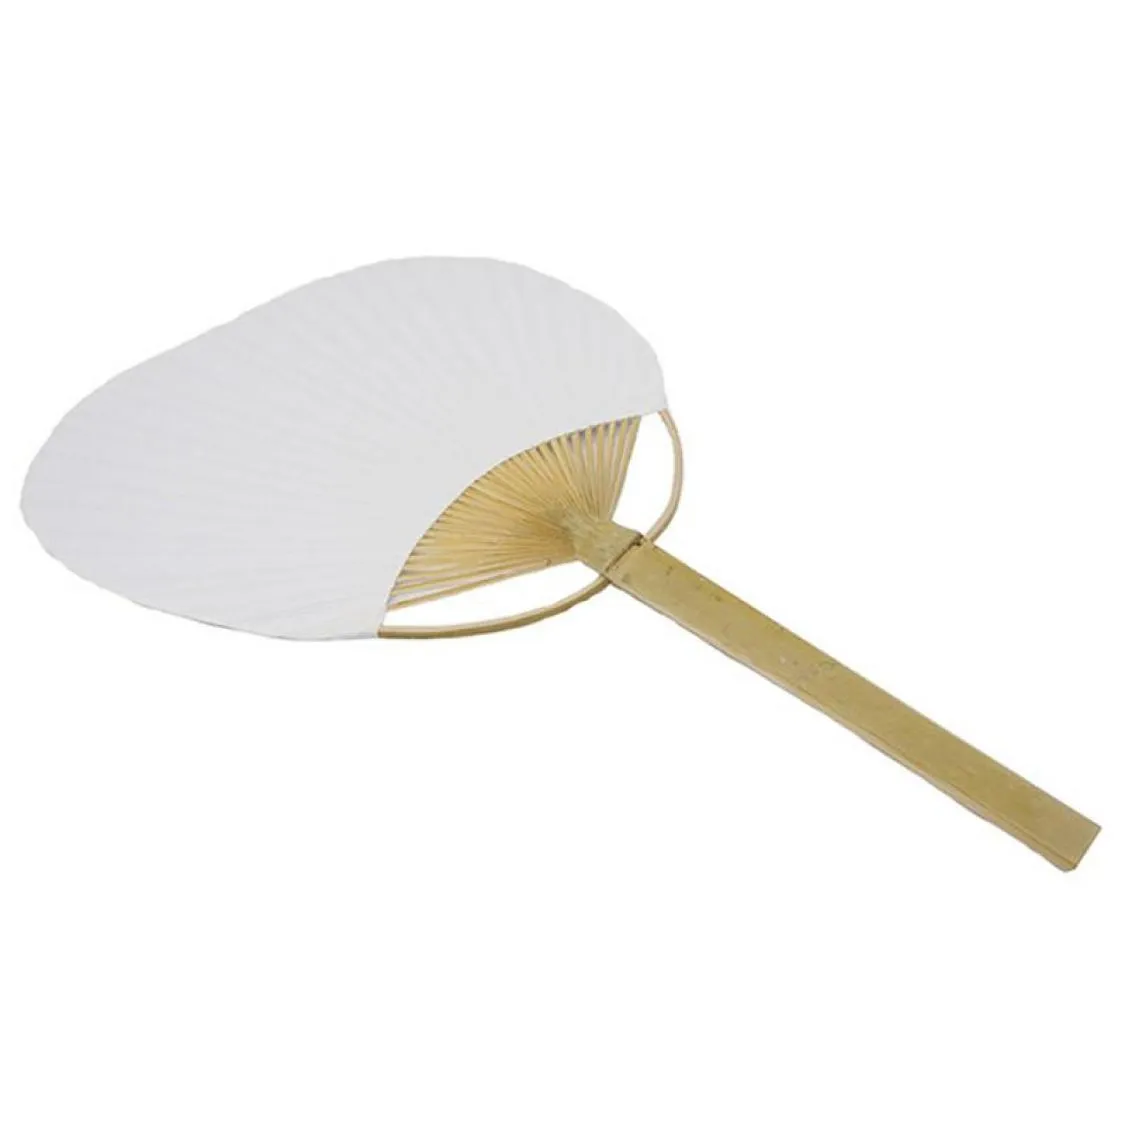 Paddle Hand Fans with Bamboo Frame and Handle Wedding Party Favors Gifts Paddle Paper Fan Spanish Fan5908866